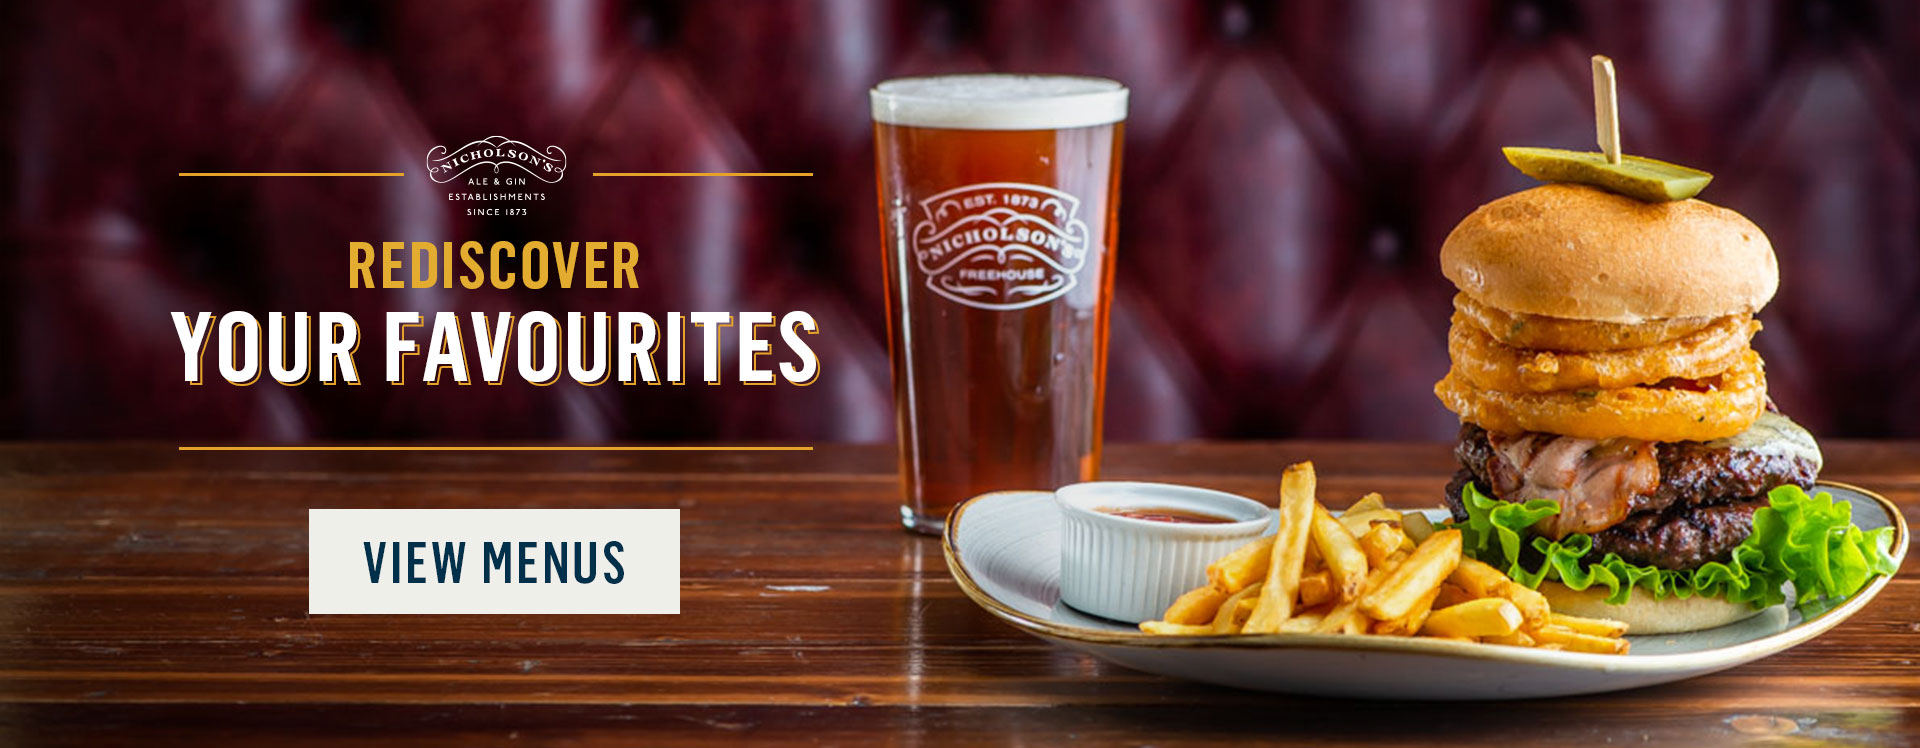 Rediscover your favourites at The Chequers